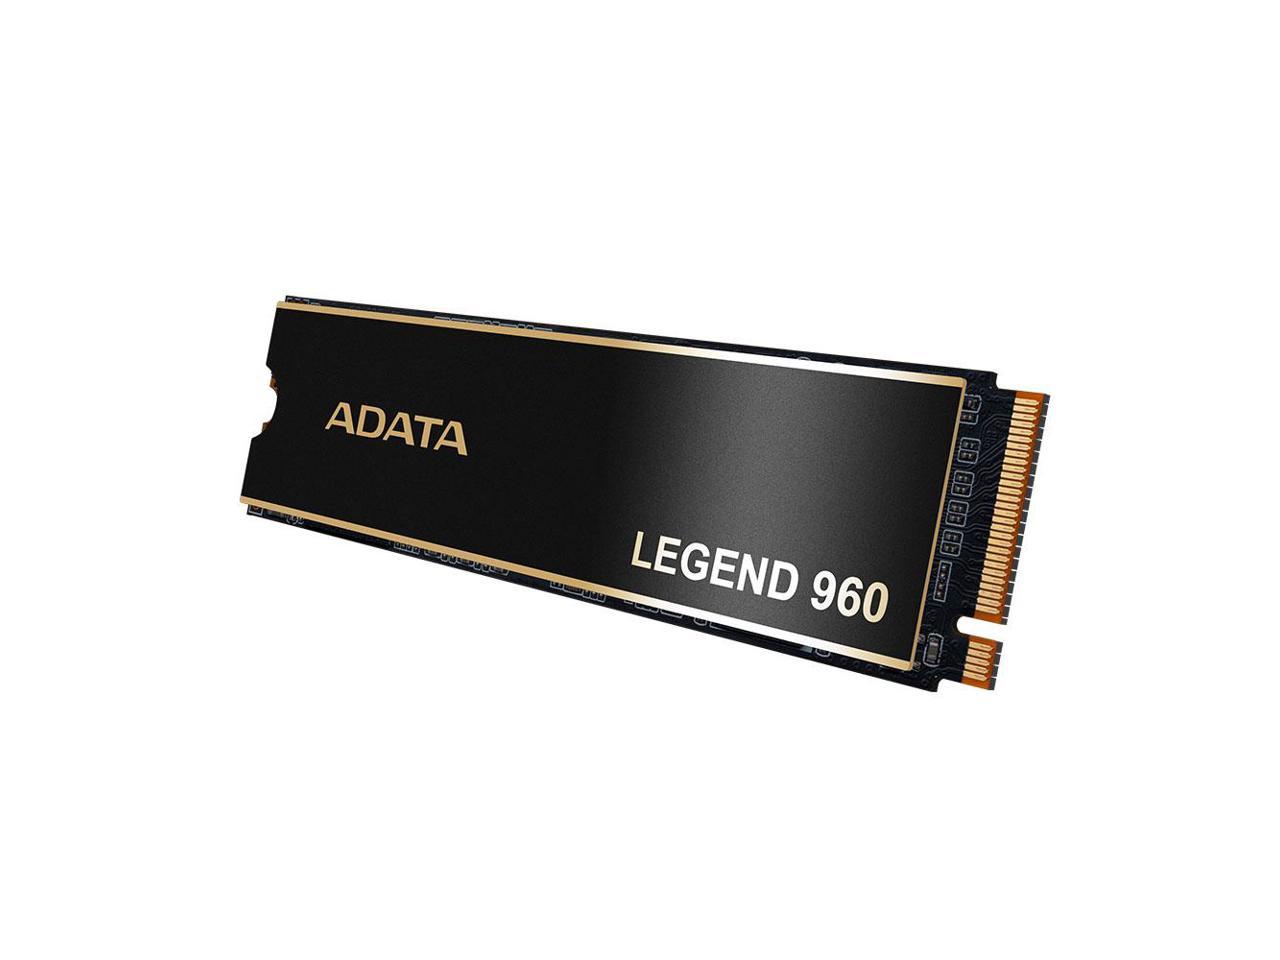 ADATA LEGEND 960 2TB SSD GEN4x4 M.2 2280 Internal Solid State Drive | PS5 Compatible - SMI SM2264 3D NAND | Up to 7400 MBps - Black/Gold 1PK | 1560 TBW